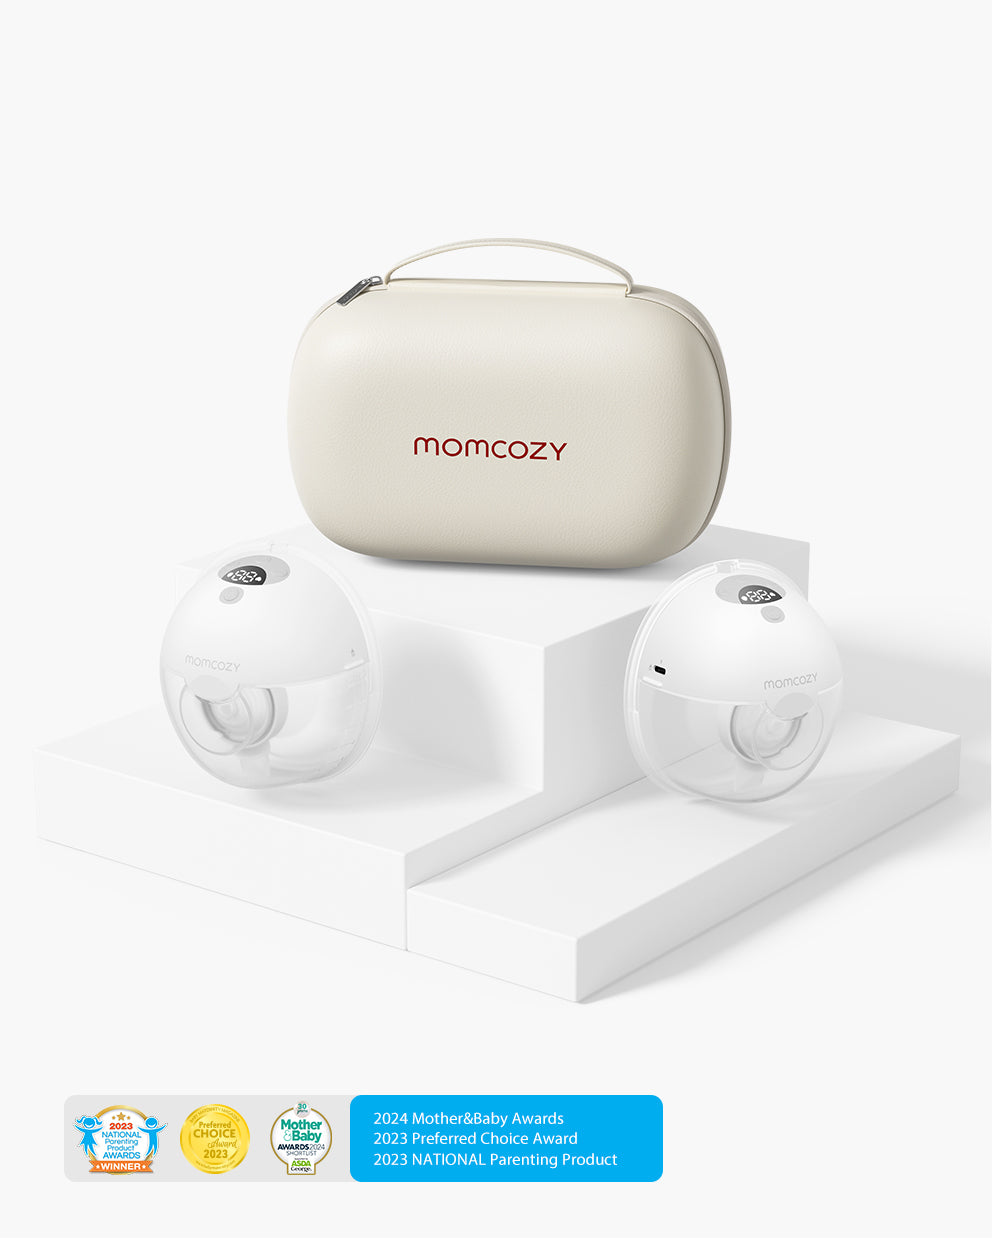 Momcozy m5 moms - what settings do you use? Do you prefer 🩷 + 💧 mode or  just 💧? Wearable pump featured is the @momcozy m5 pump